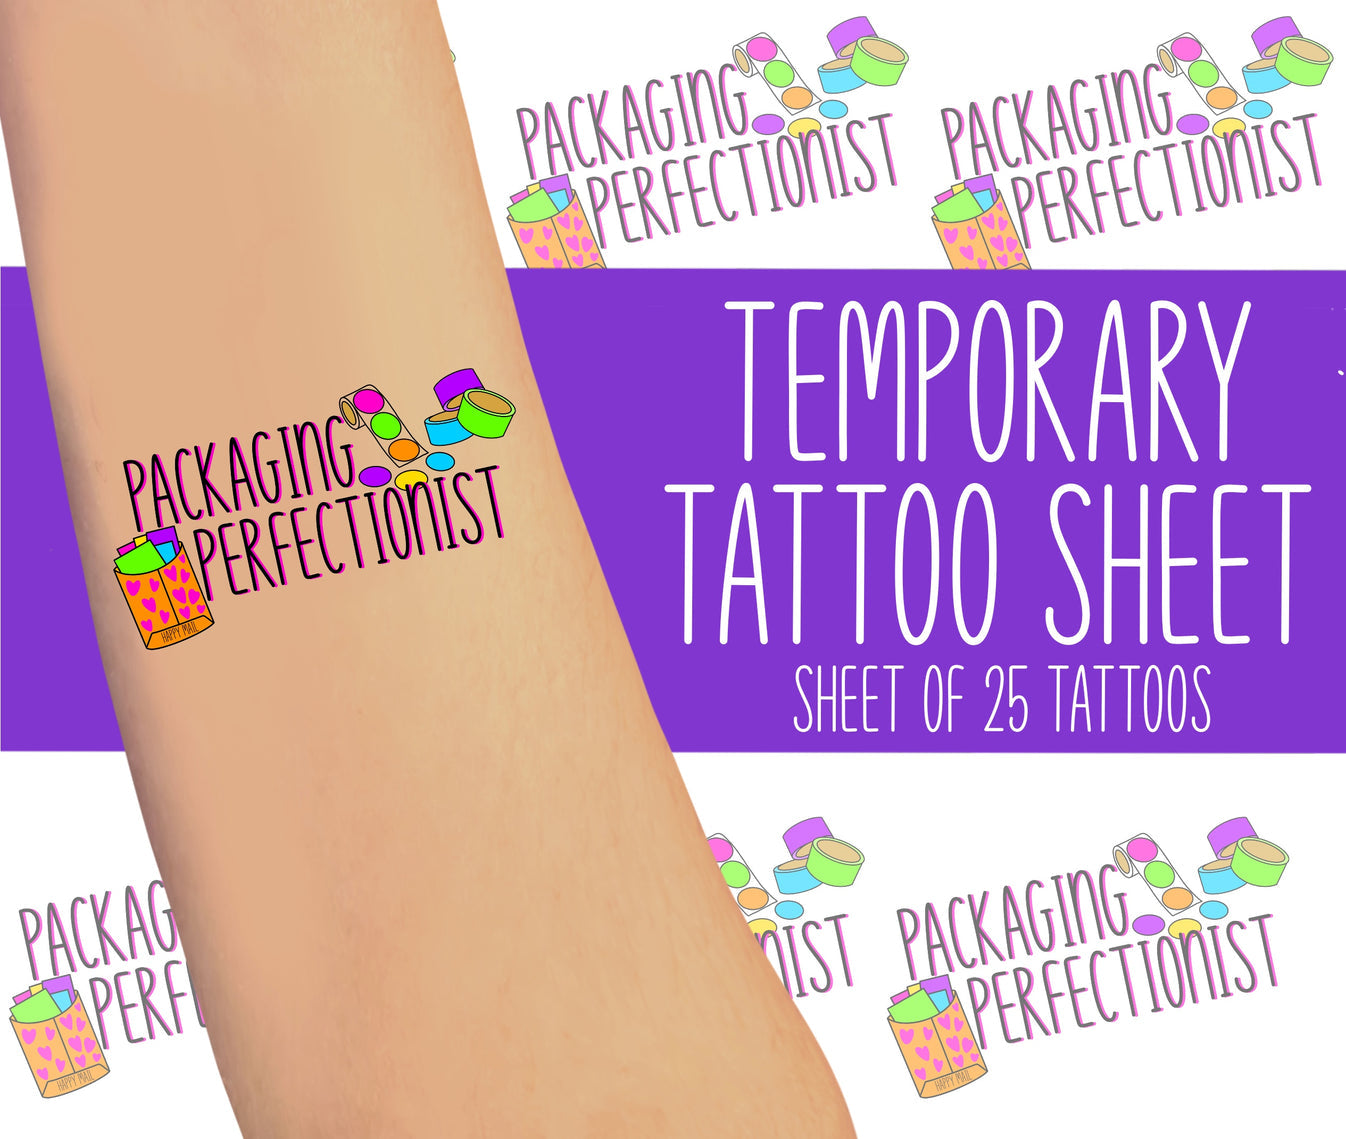 Packaging Perfectionist Temporary Tattoos